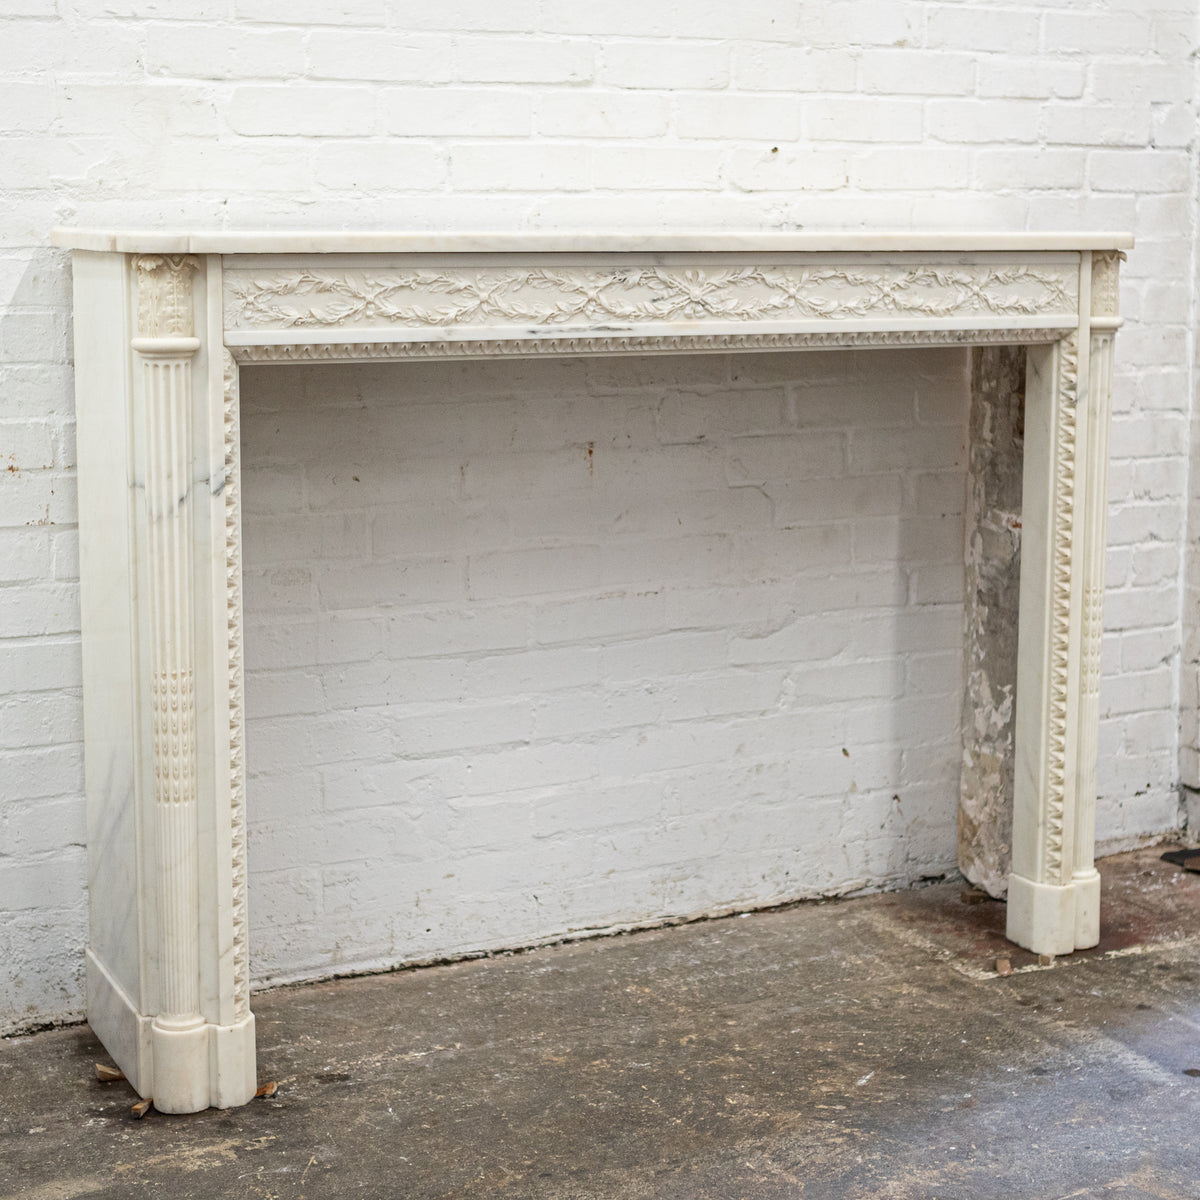 Exceptional Antique Louis XVI Style Marble Chimneypiece | The Architectural Forum